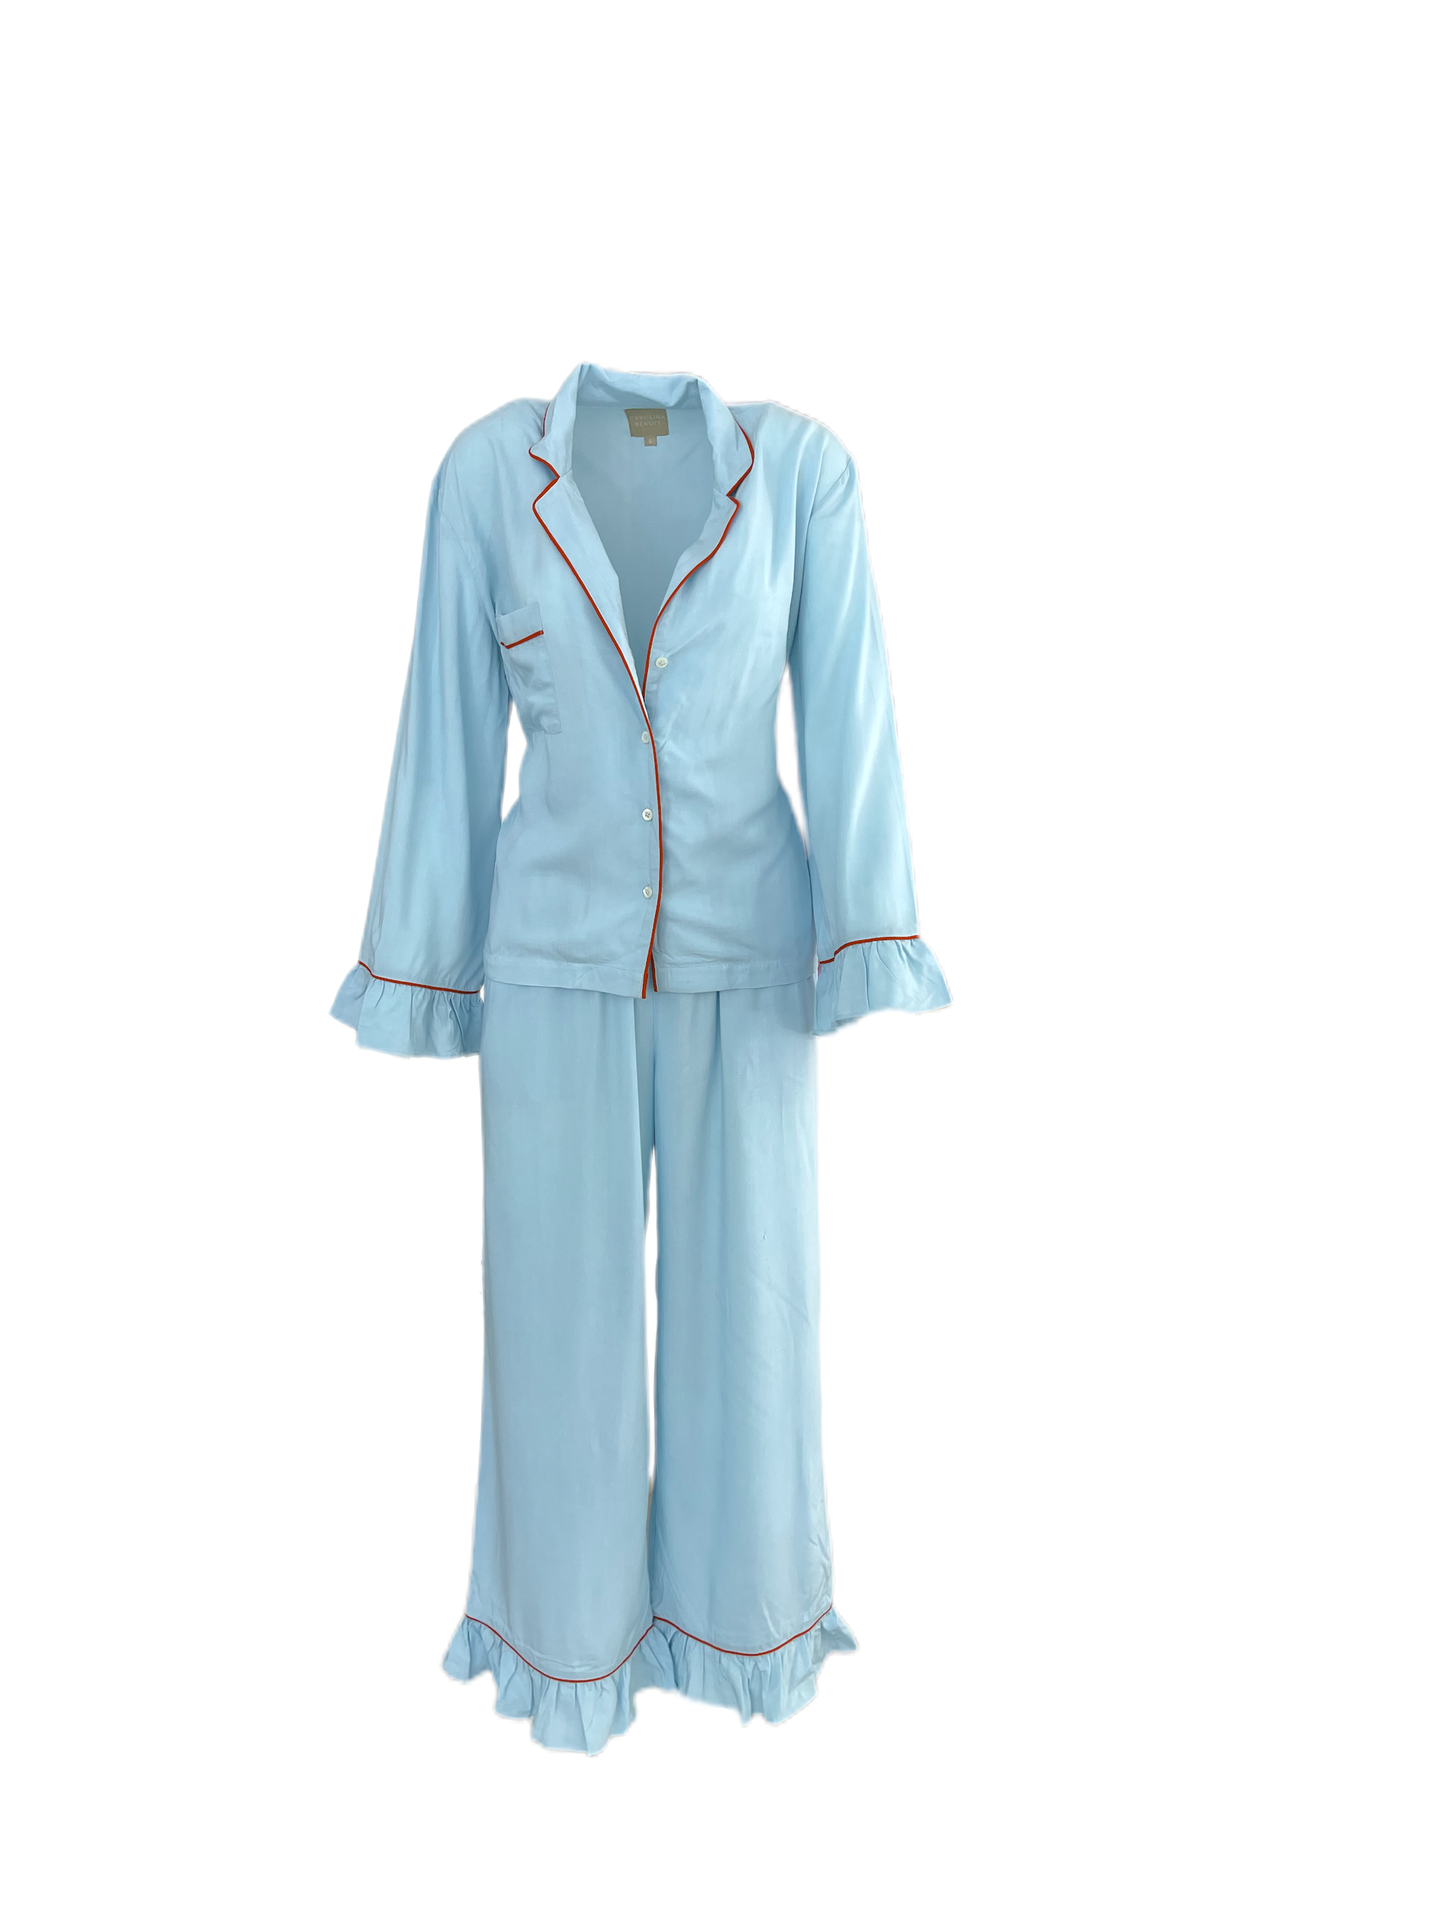 Baby Blue ruffles with red pipping pajama set